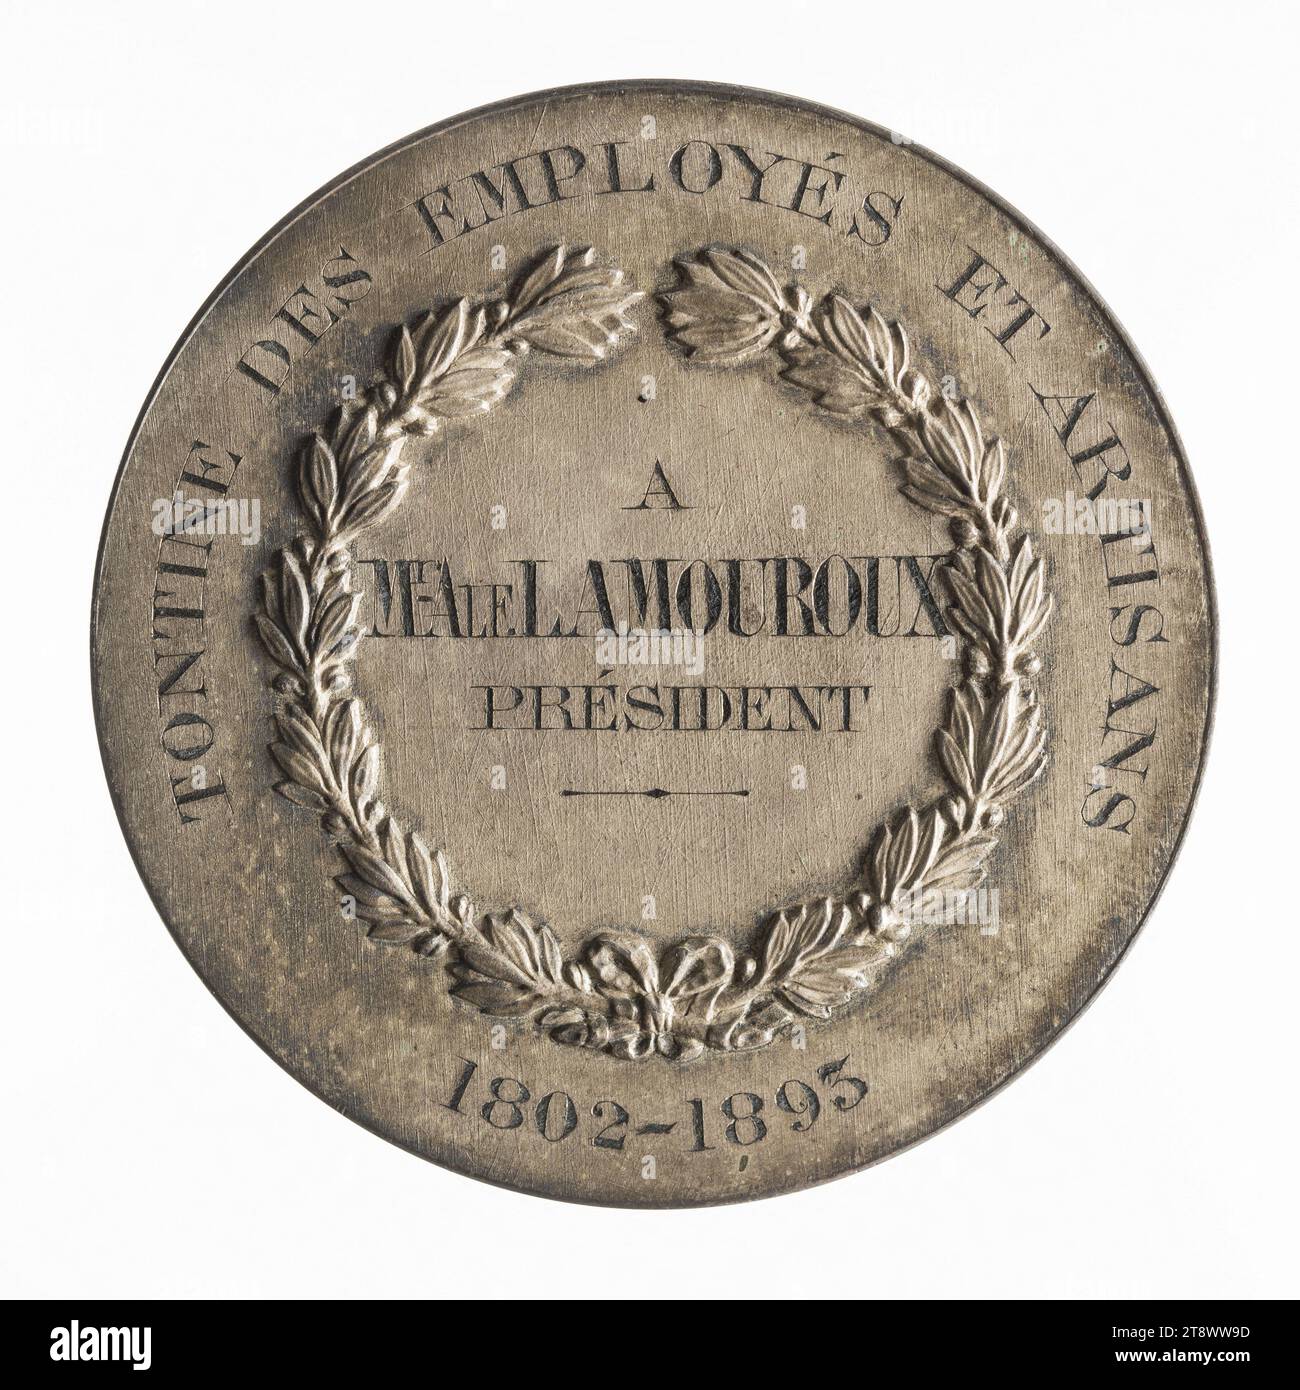 Tribute to Mr. Afl. Lamouroux, president of the tontine of employees and craftsmen, 1893, Bescher, Auguste, Publisher, Lancelot, Engraver in medals, In 1893, Numismatics, Medal, Metal, Engraved = incised, Dimensions - Work: Diameter: 4.6 cm, Weight (type dimension): 49.36 g Stock Photo